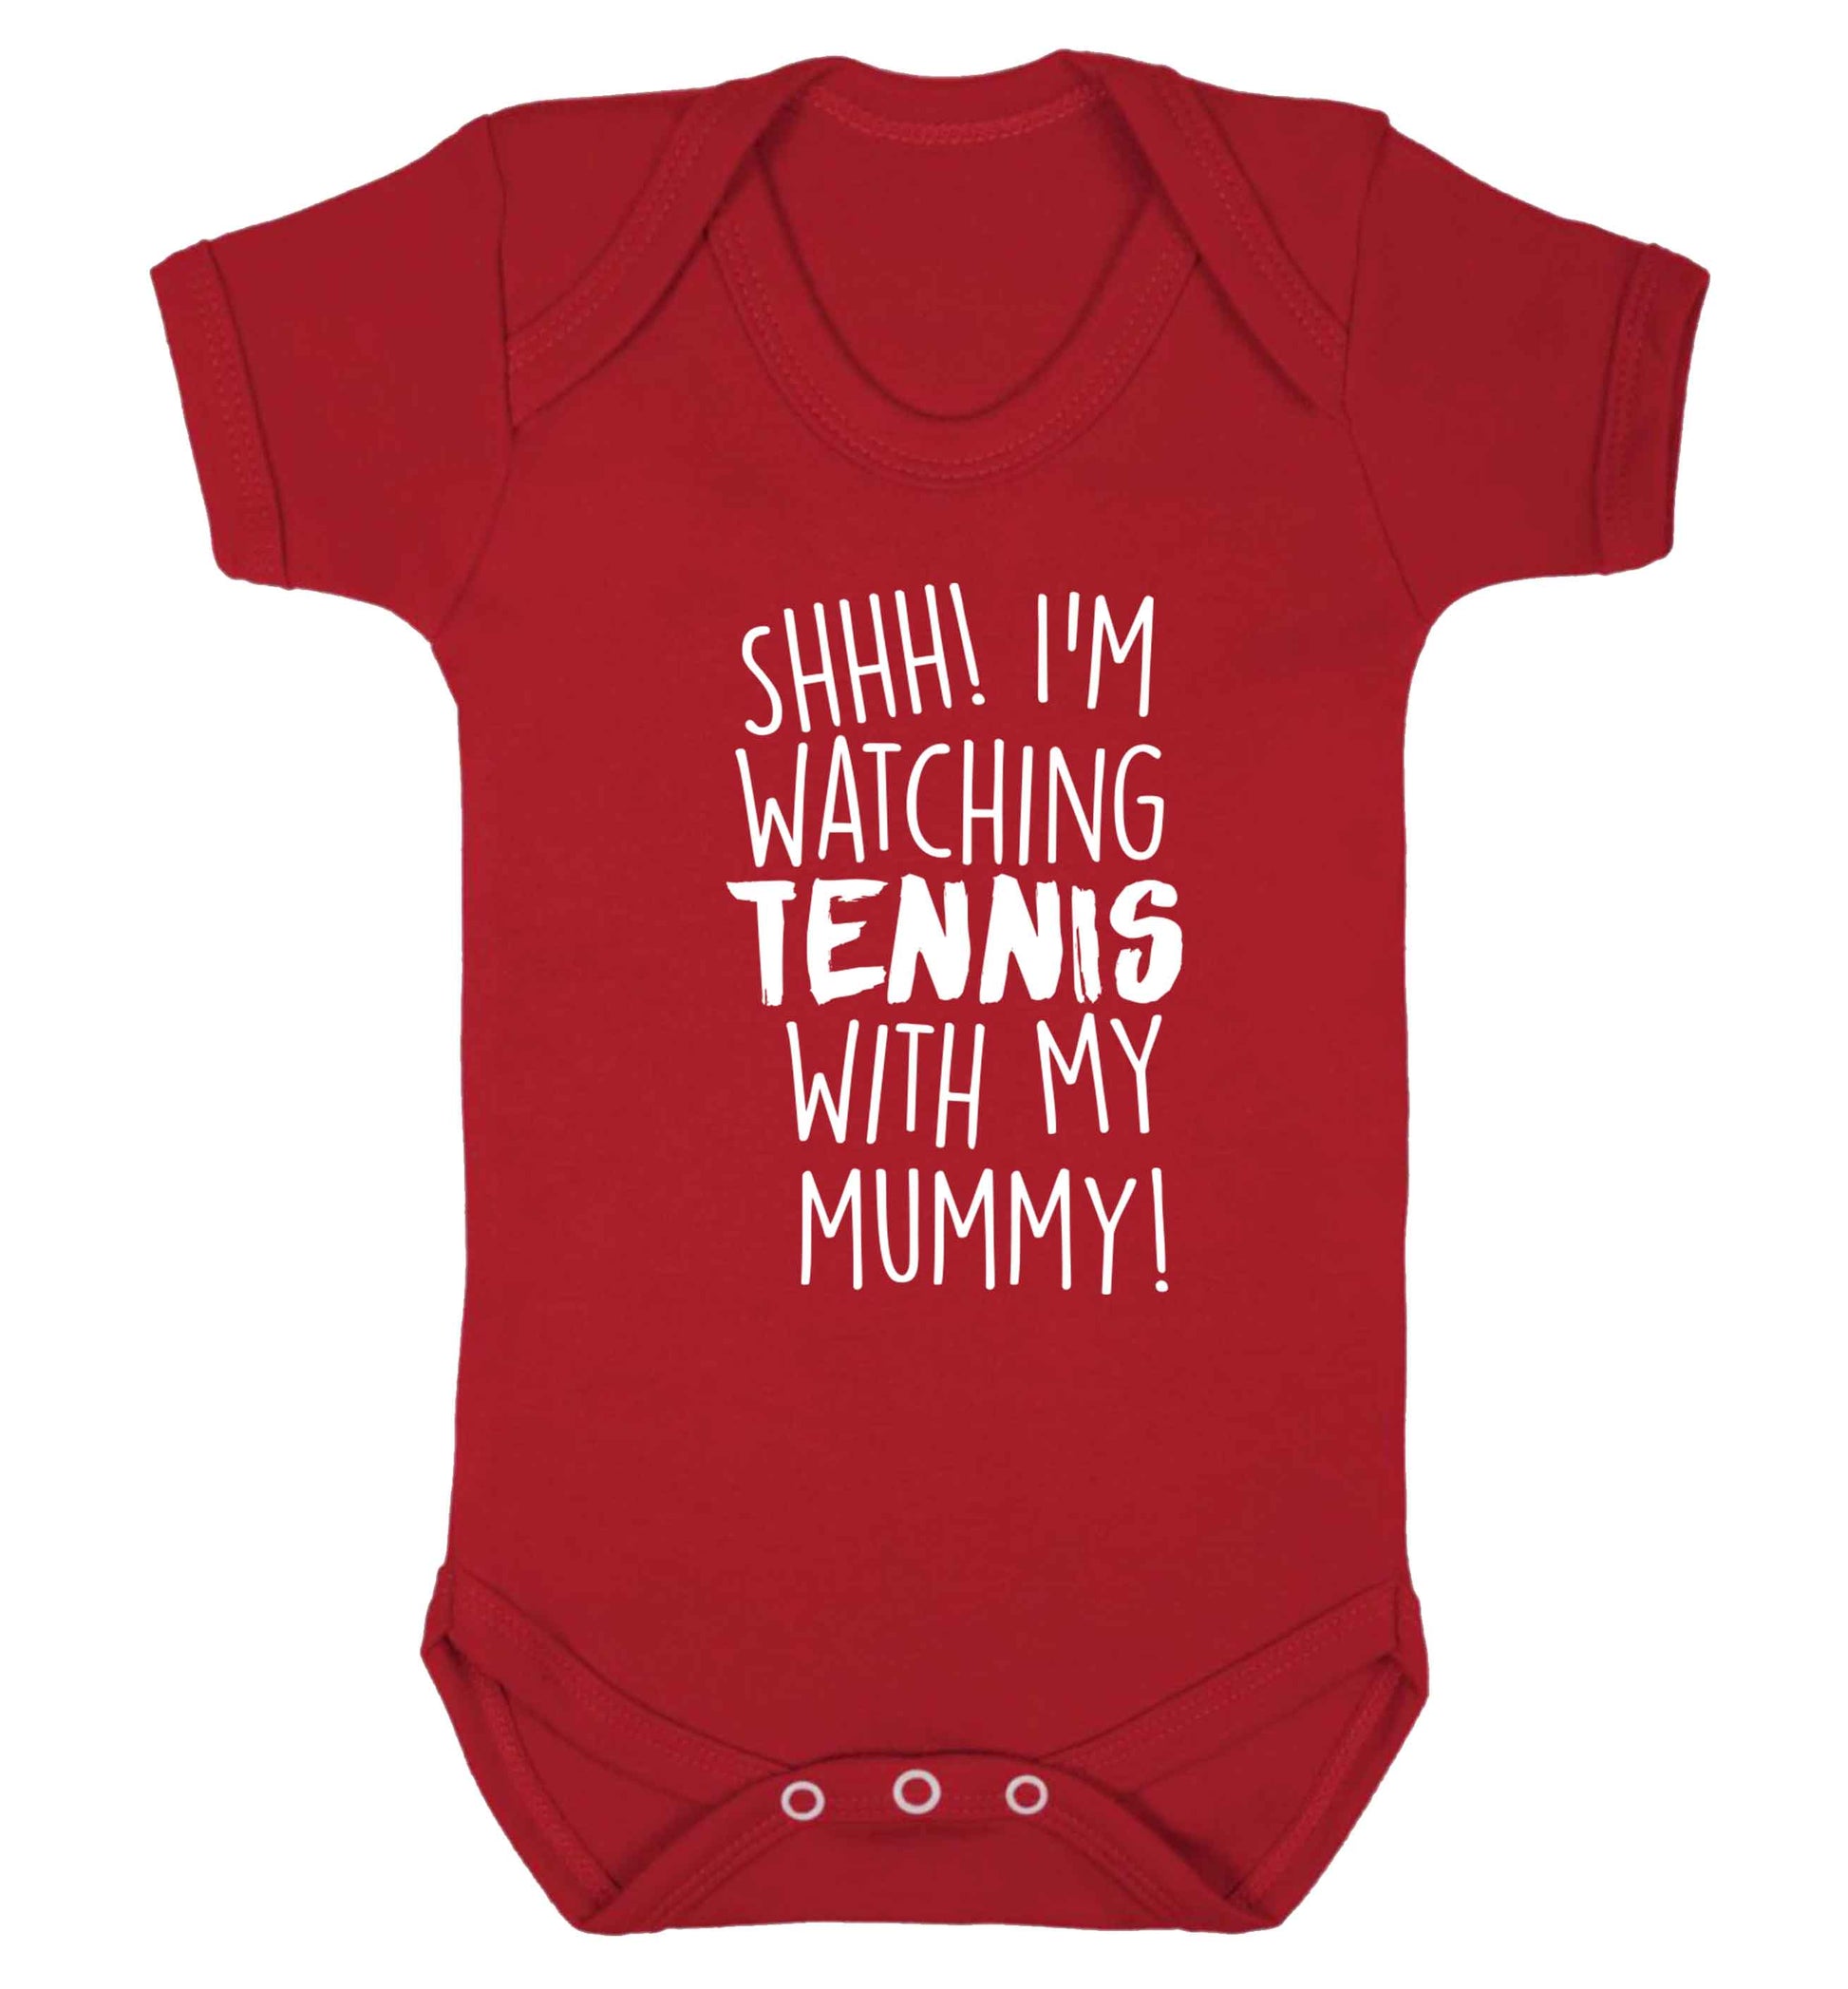 Shh! I'm watching tennis with my mummy! Baby Vest red 18-24 months